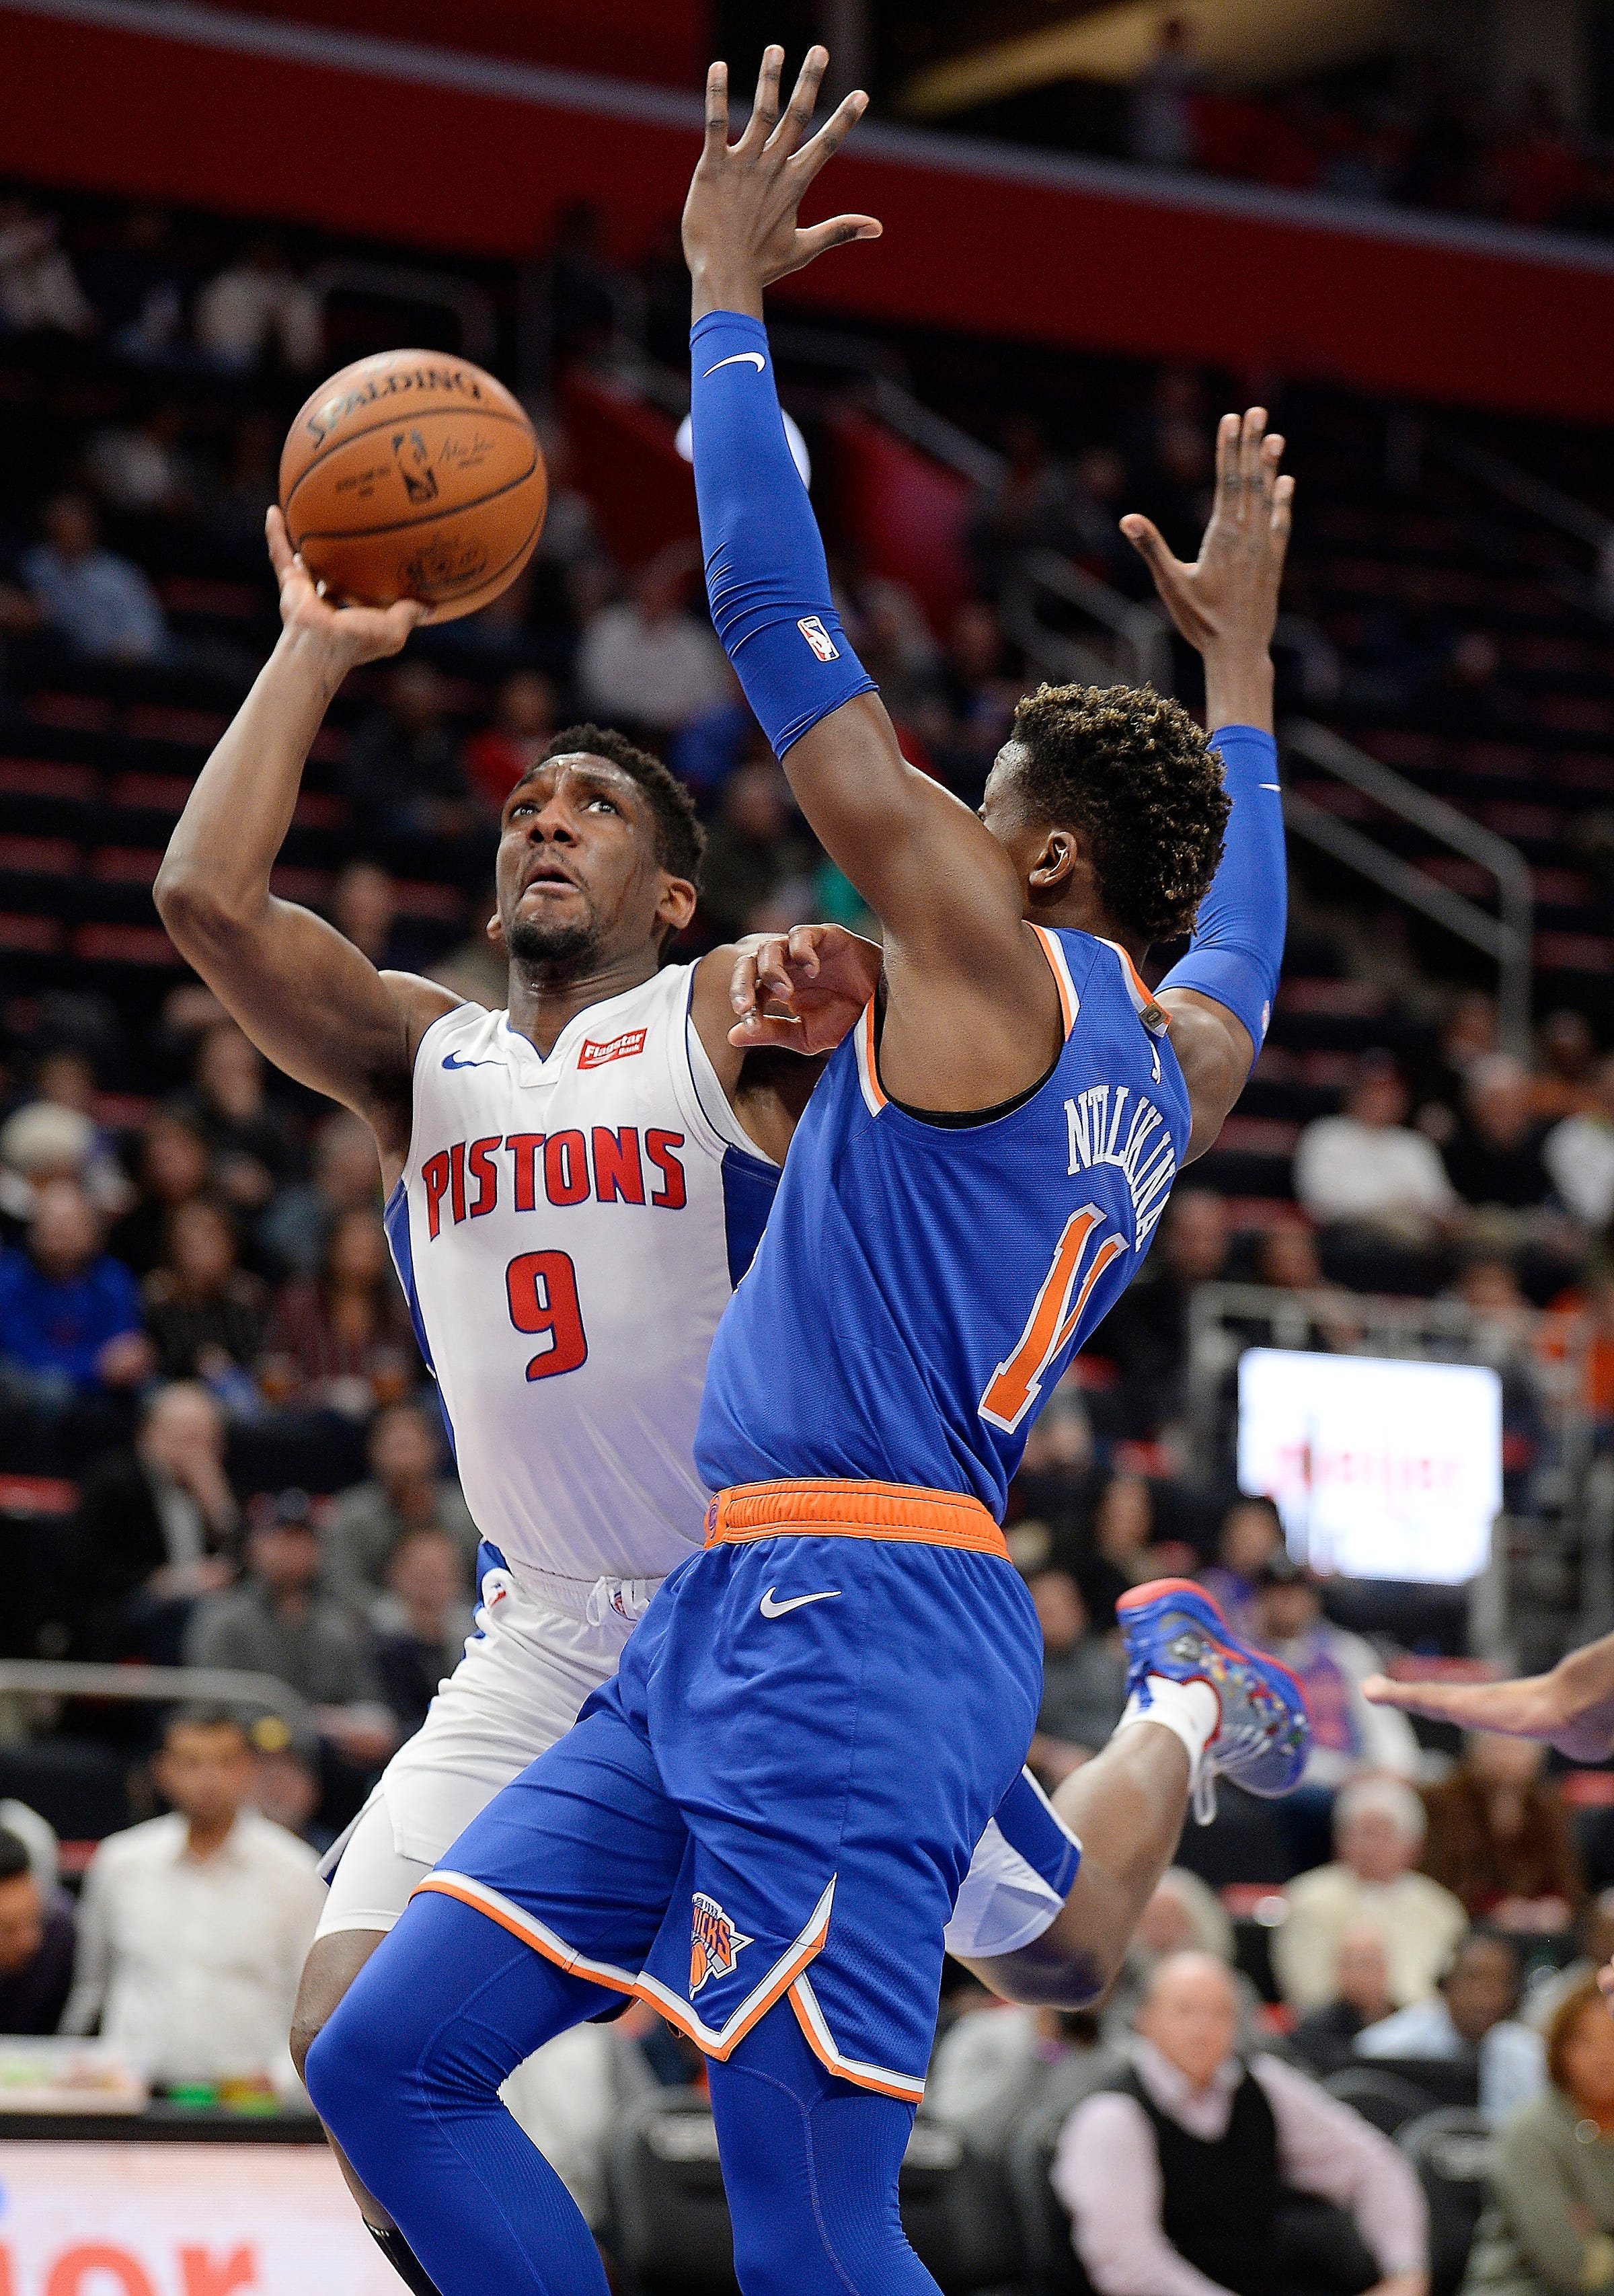 Pistons' Langston Galloway scores over Knicks' Frank Ntilikina in the second quarter.